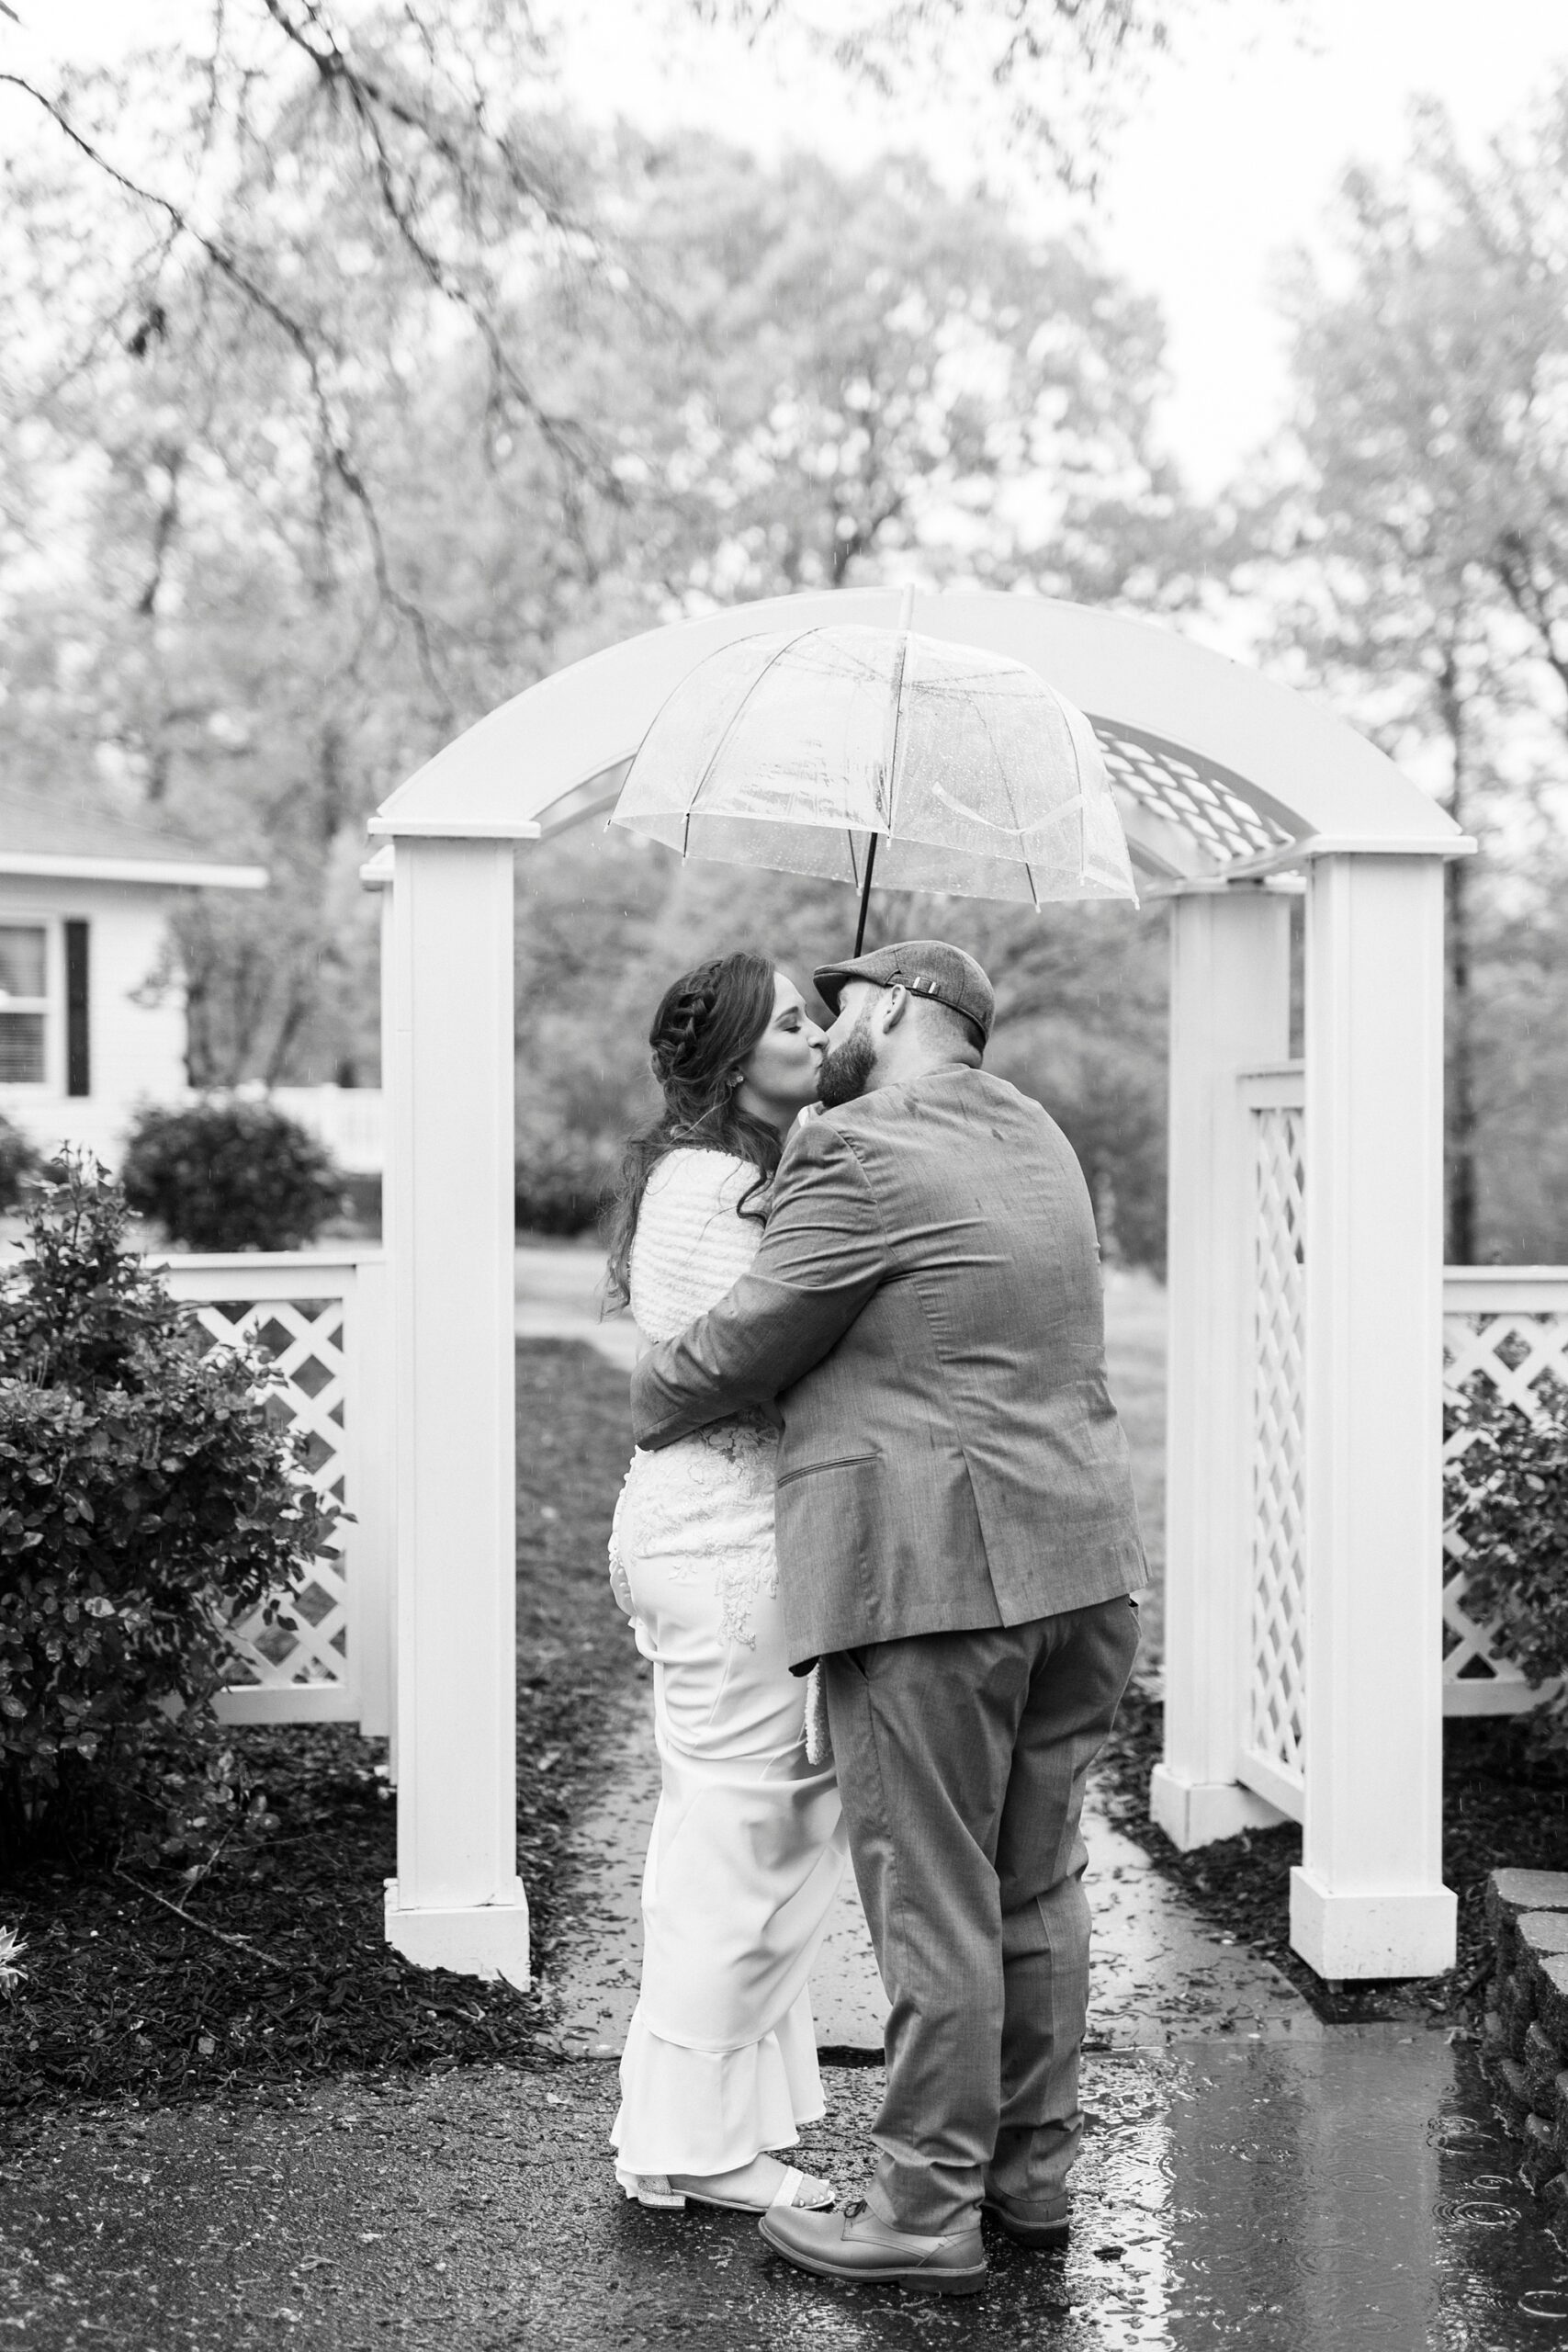 bride and groom kiss under umbrellas by white arbor on rainy day 